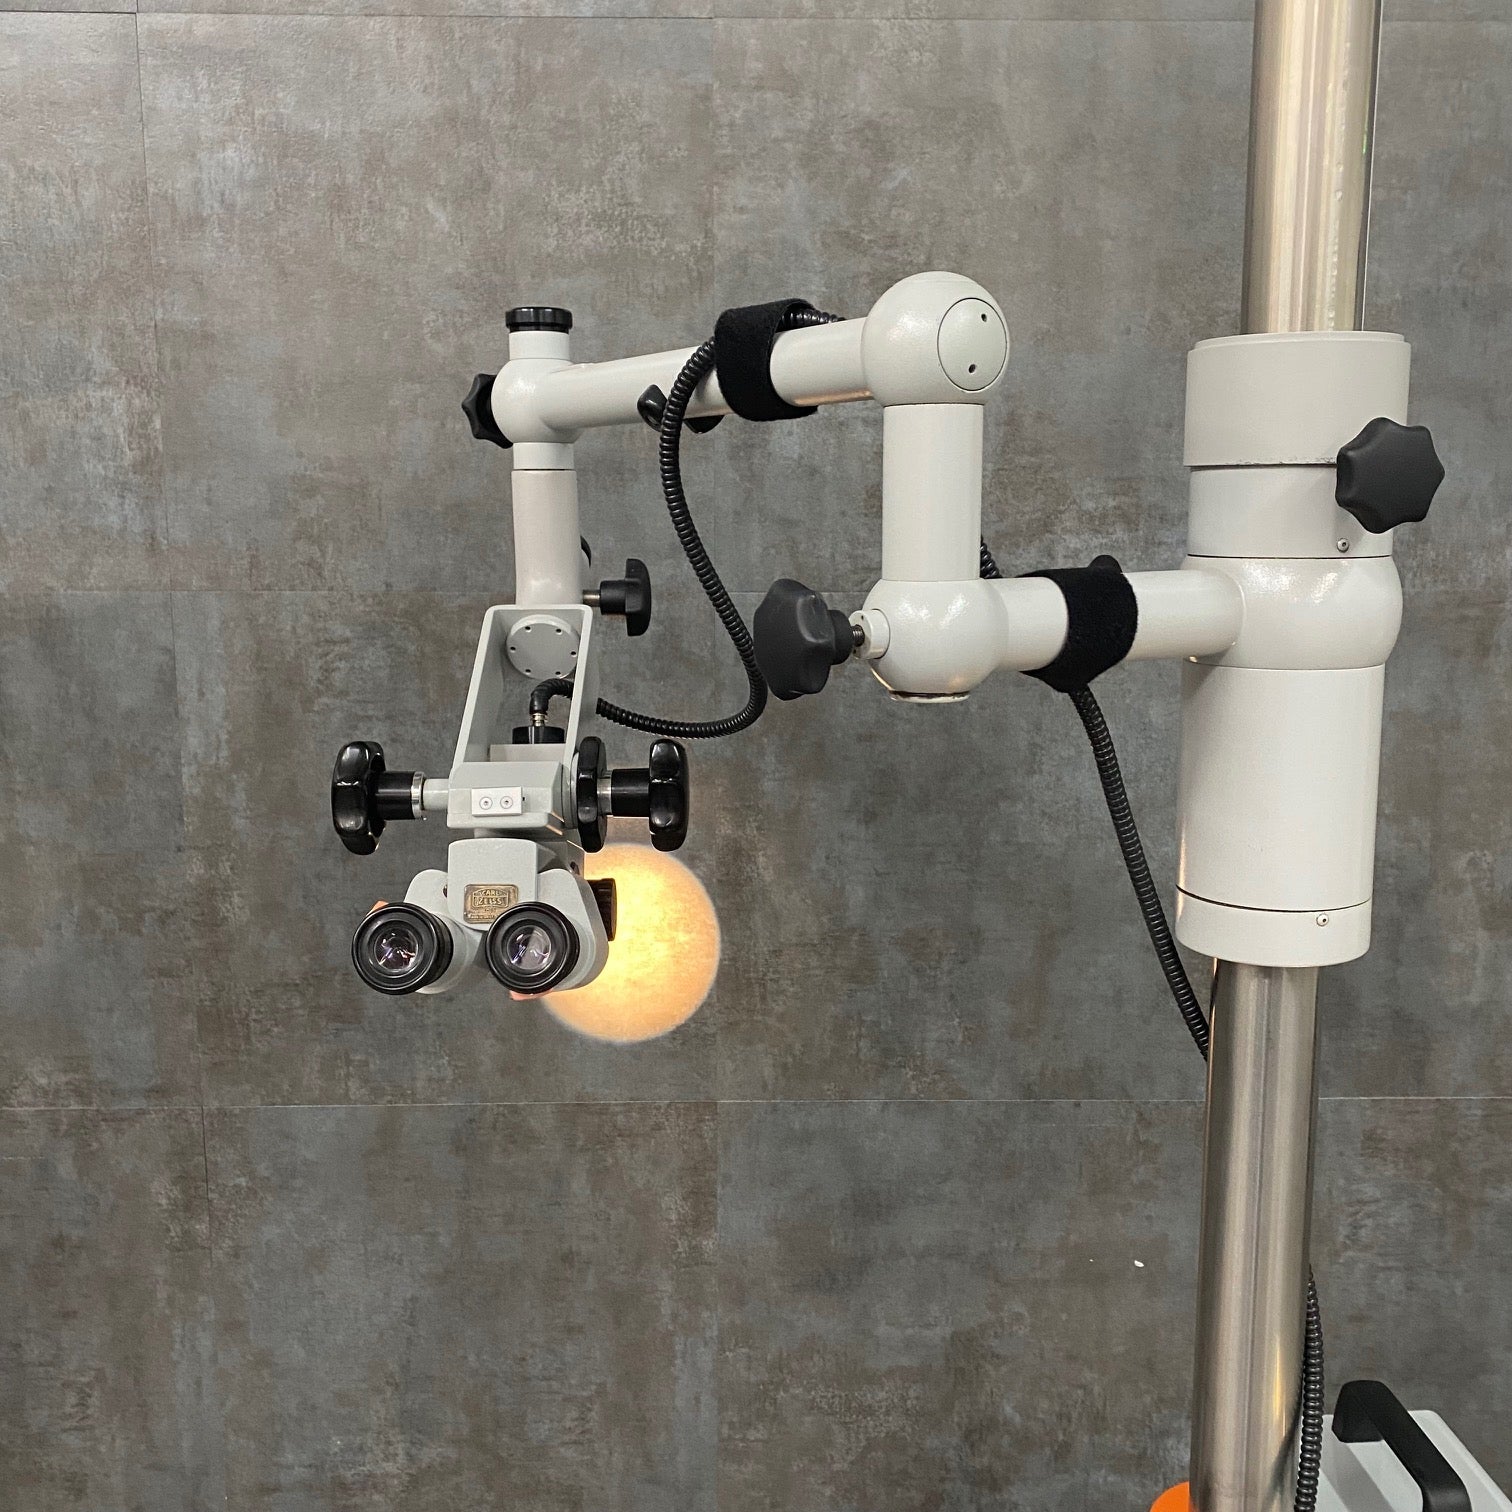 Zeiss OPMI IFC Surgical Microscope (Used)